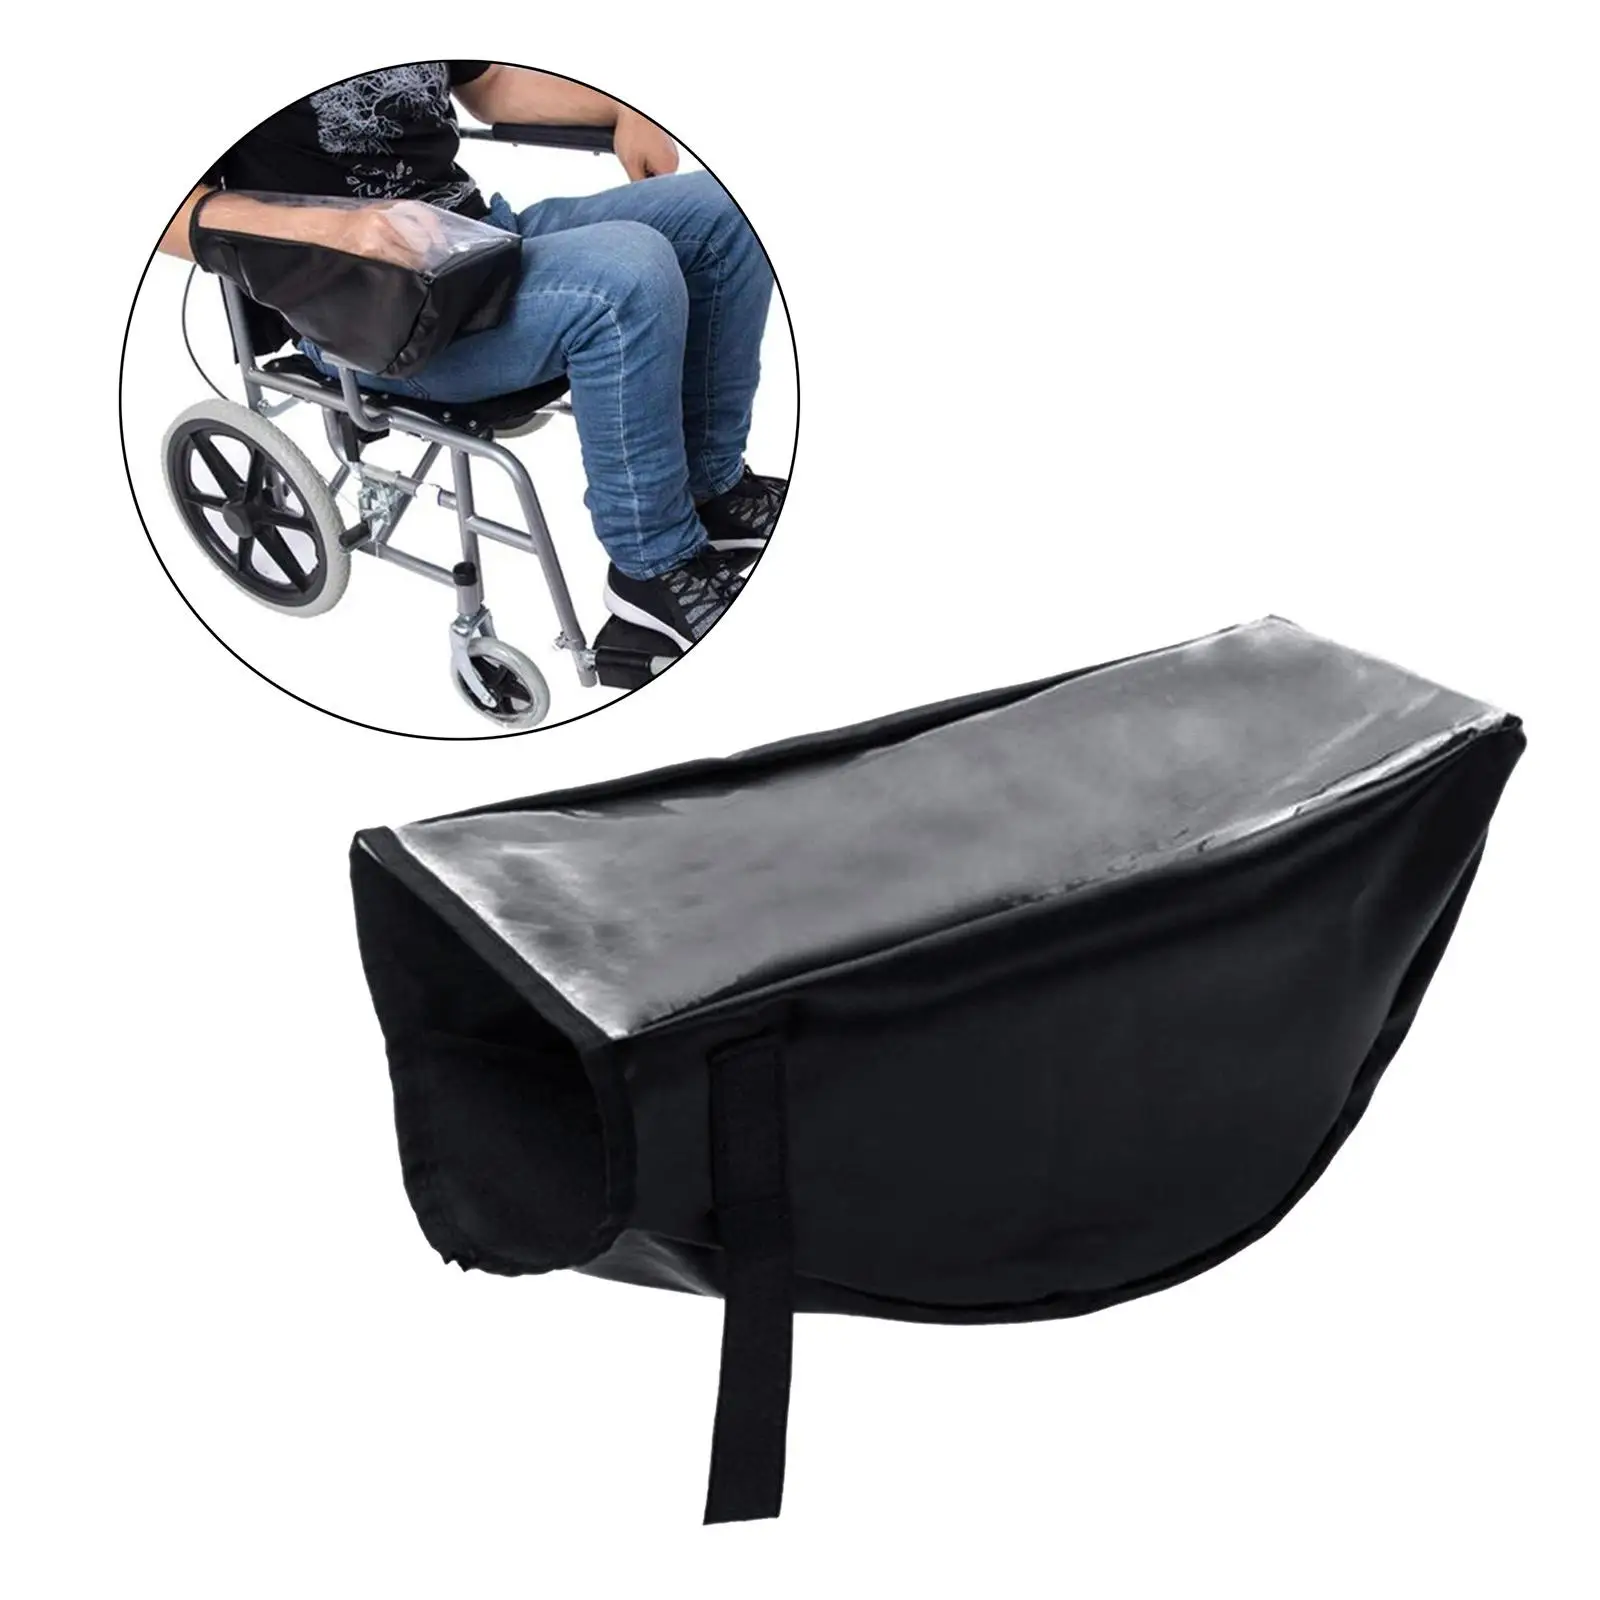 Power Wheel Chair Joystick Control Panel Armrest Cover for Waterproof